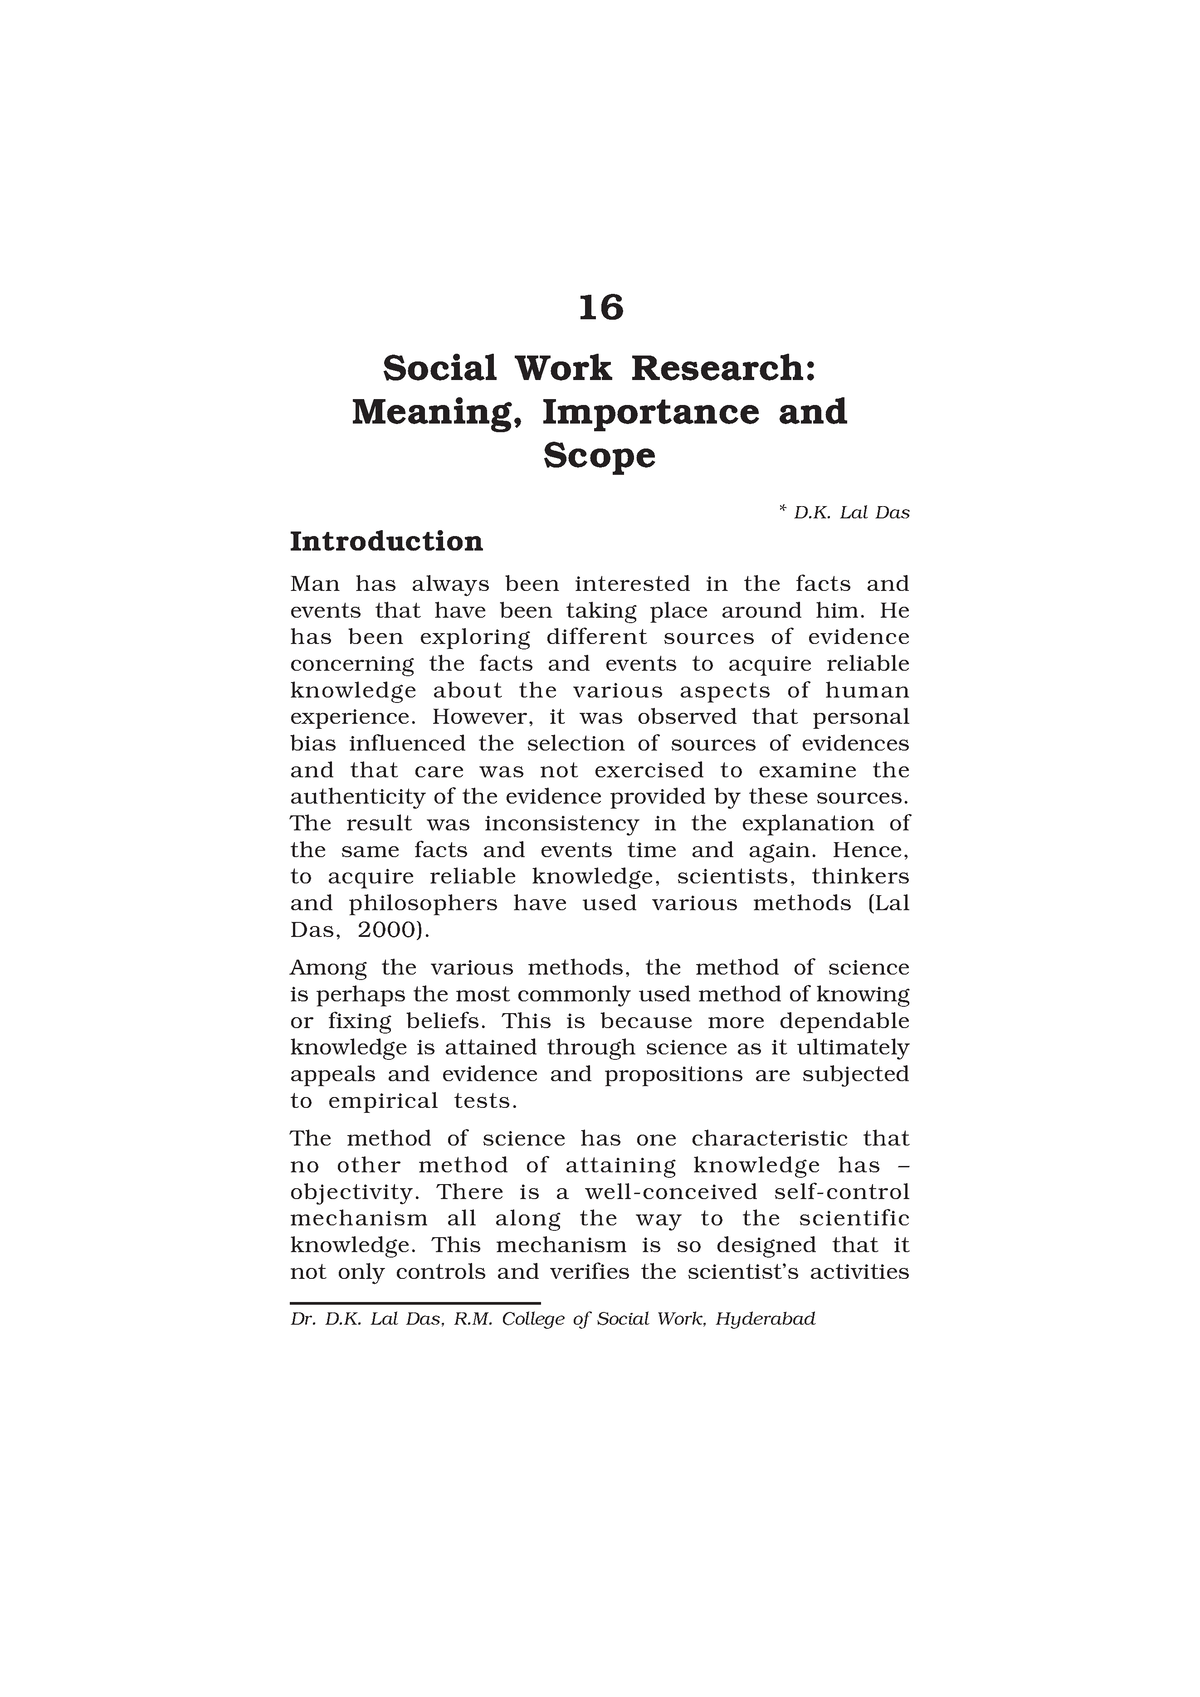 what is an example of a social work research topic